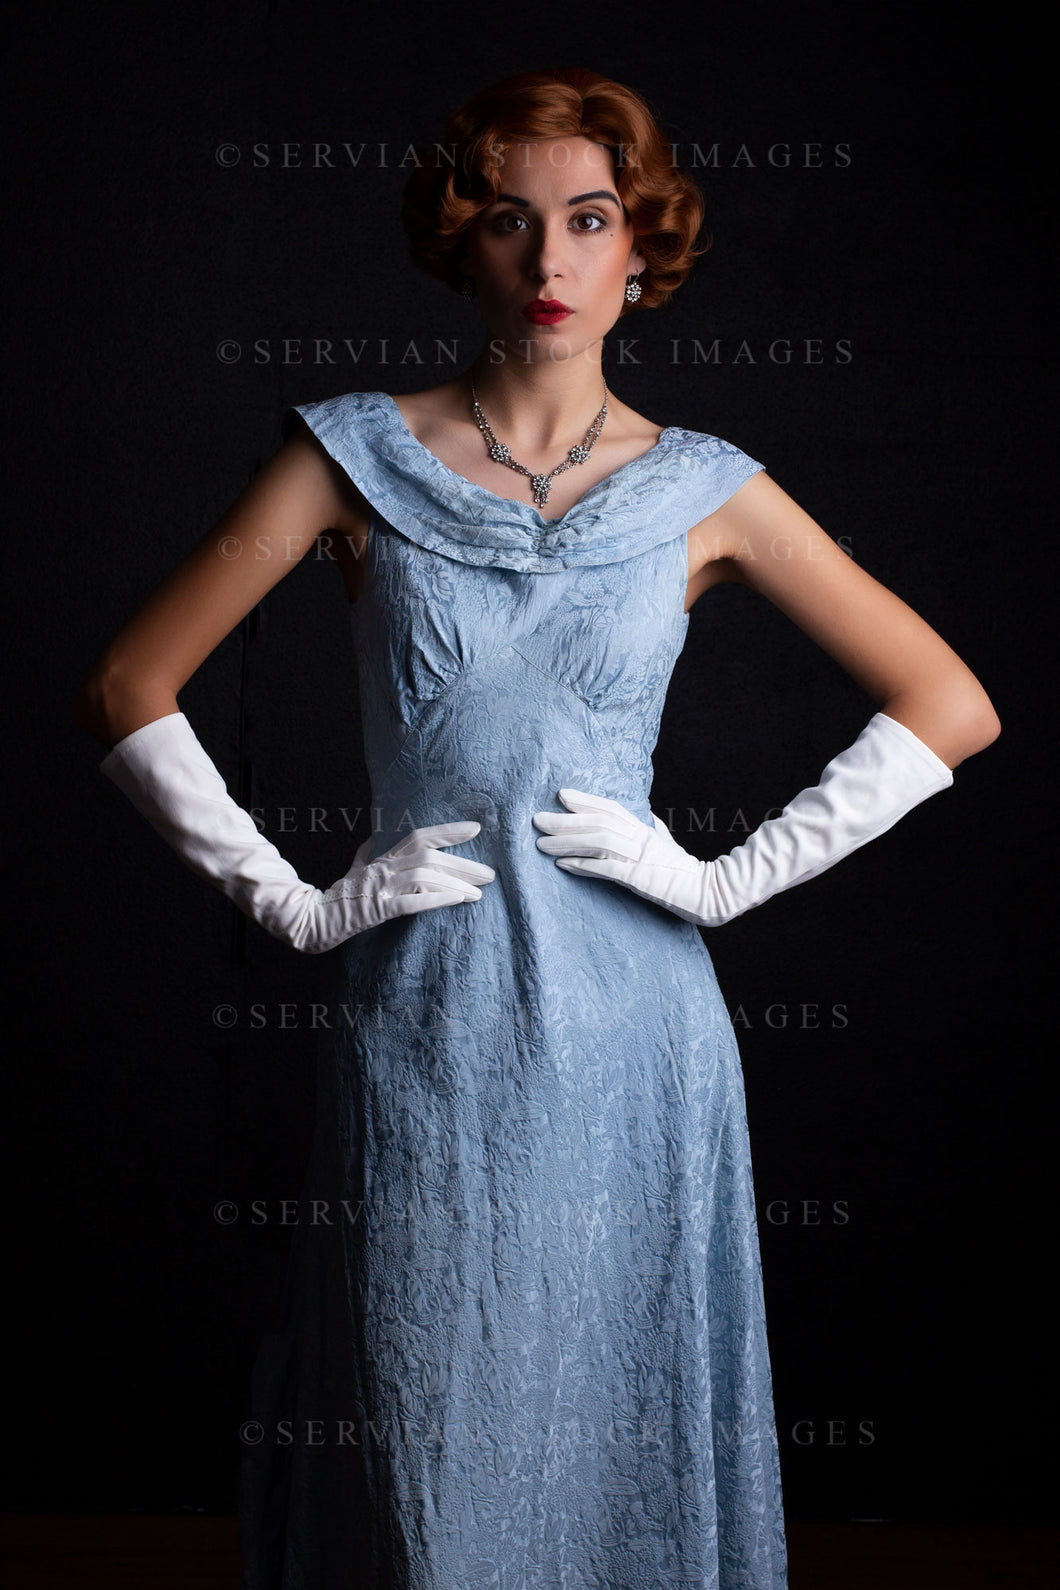 1930s woman wearing a blue vintage dress, long white gloves, and a diamante necklace against a black backdrop.(Sarah 0220)